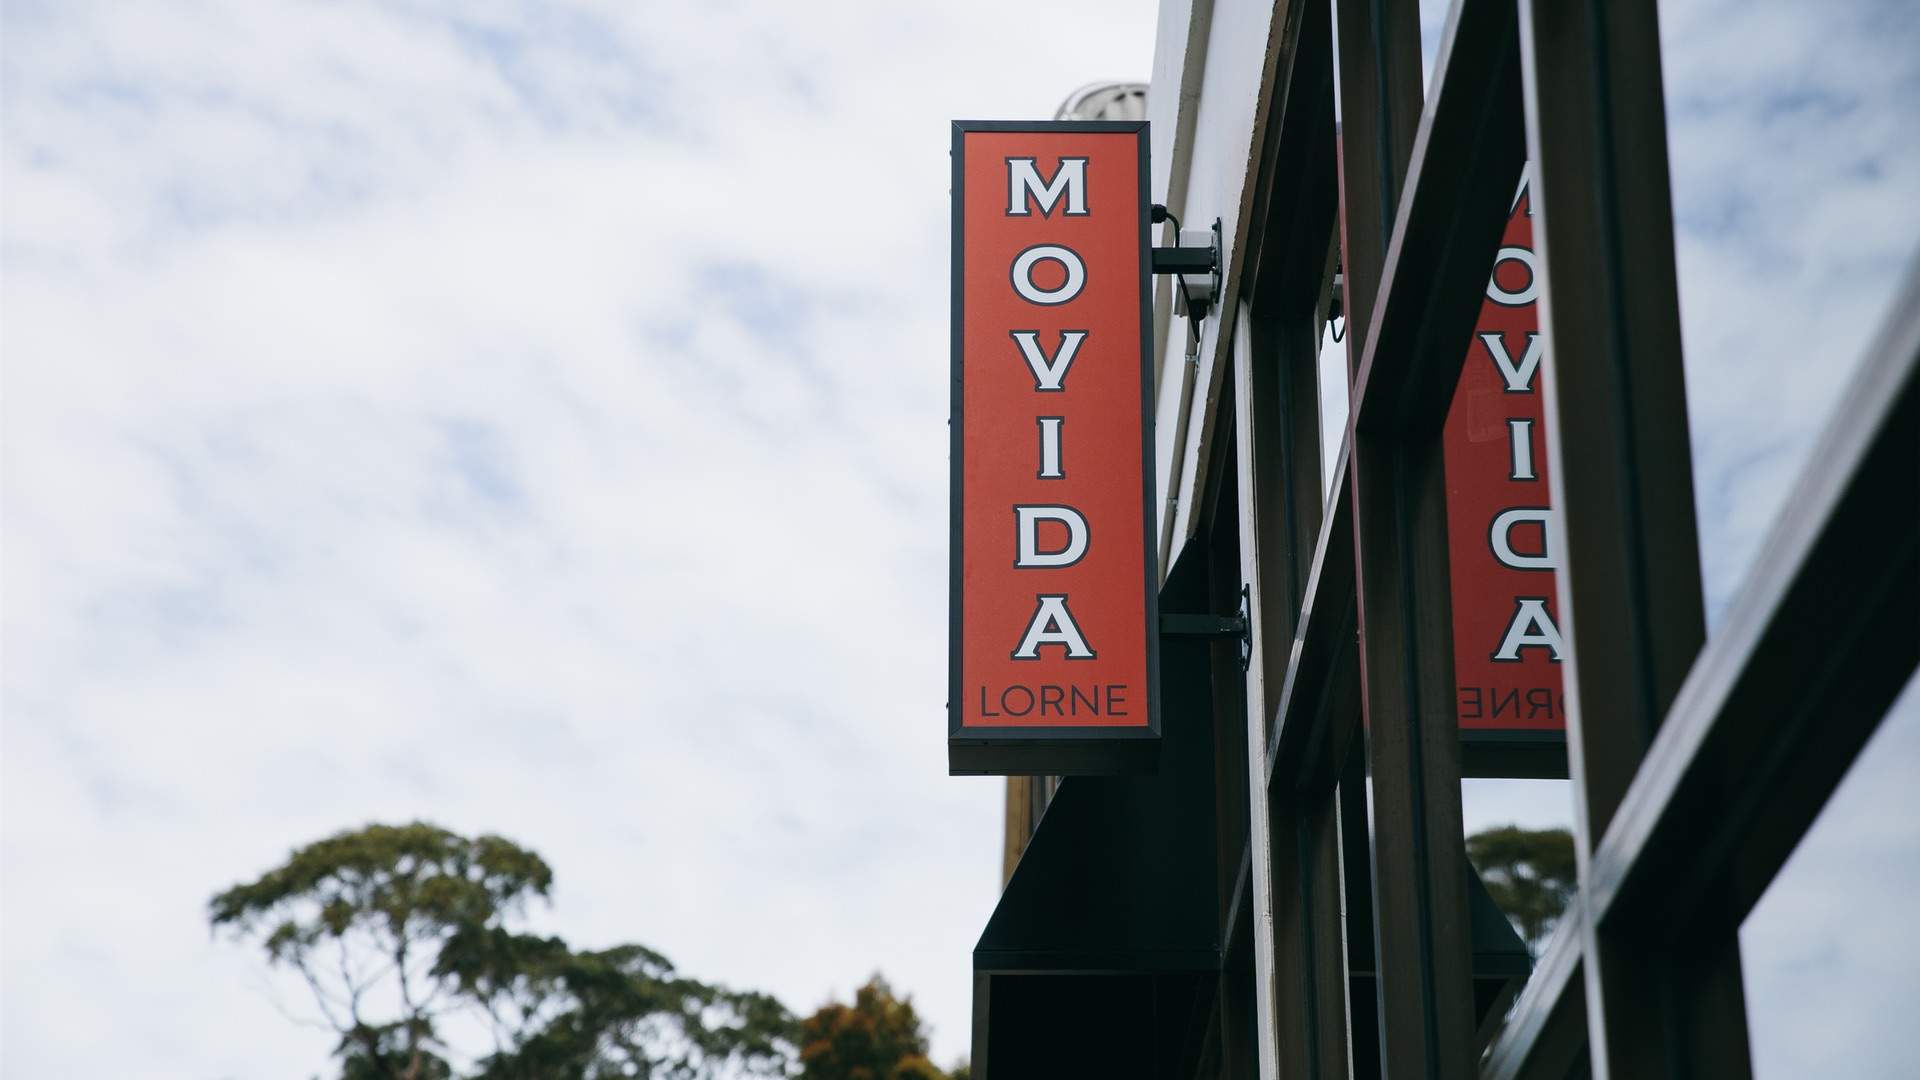 Lorne Is Now Home to MoVida's First Out-of-Town Beachside Restaurant